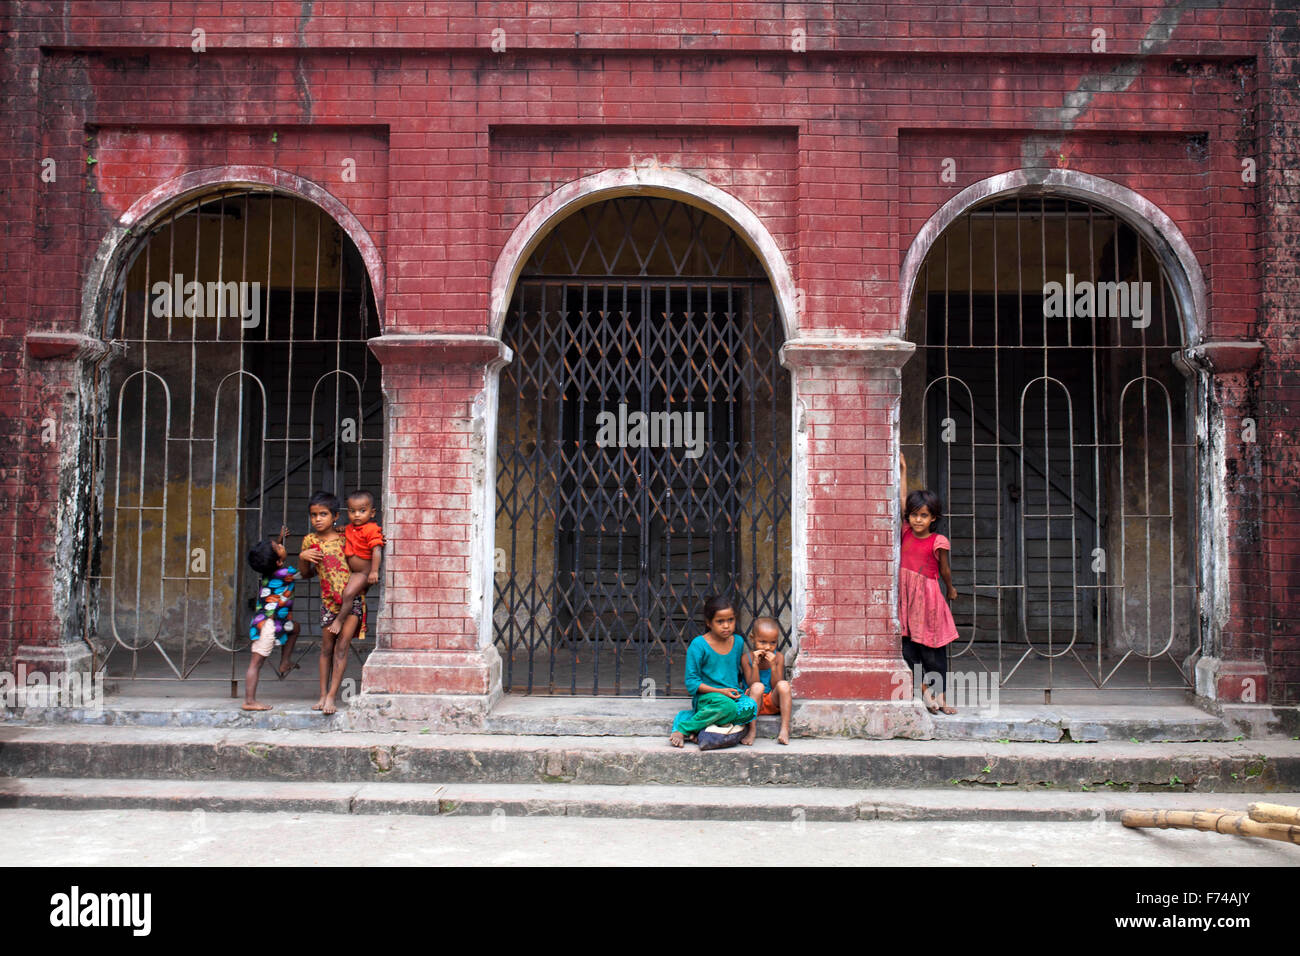 DHAKA, BANGLADESH 17th November: Street children playing in front of old building in Old Dhaka on November 17, 2015. Old Dhaka is a term used to refer to the historic old city of Dhaka, the capital of modern Bangladesh. It was founded in 1608 as Jahangir Nagar, the capital of Mughal Bengal. Stock Photo